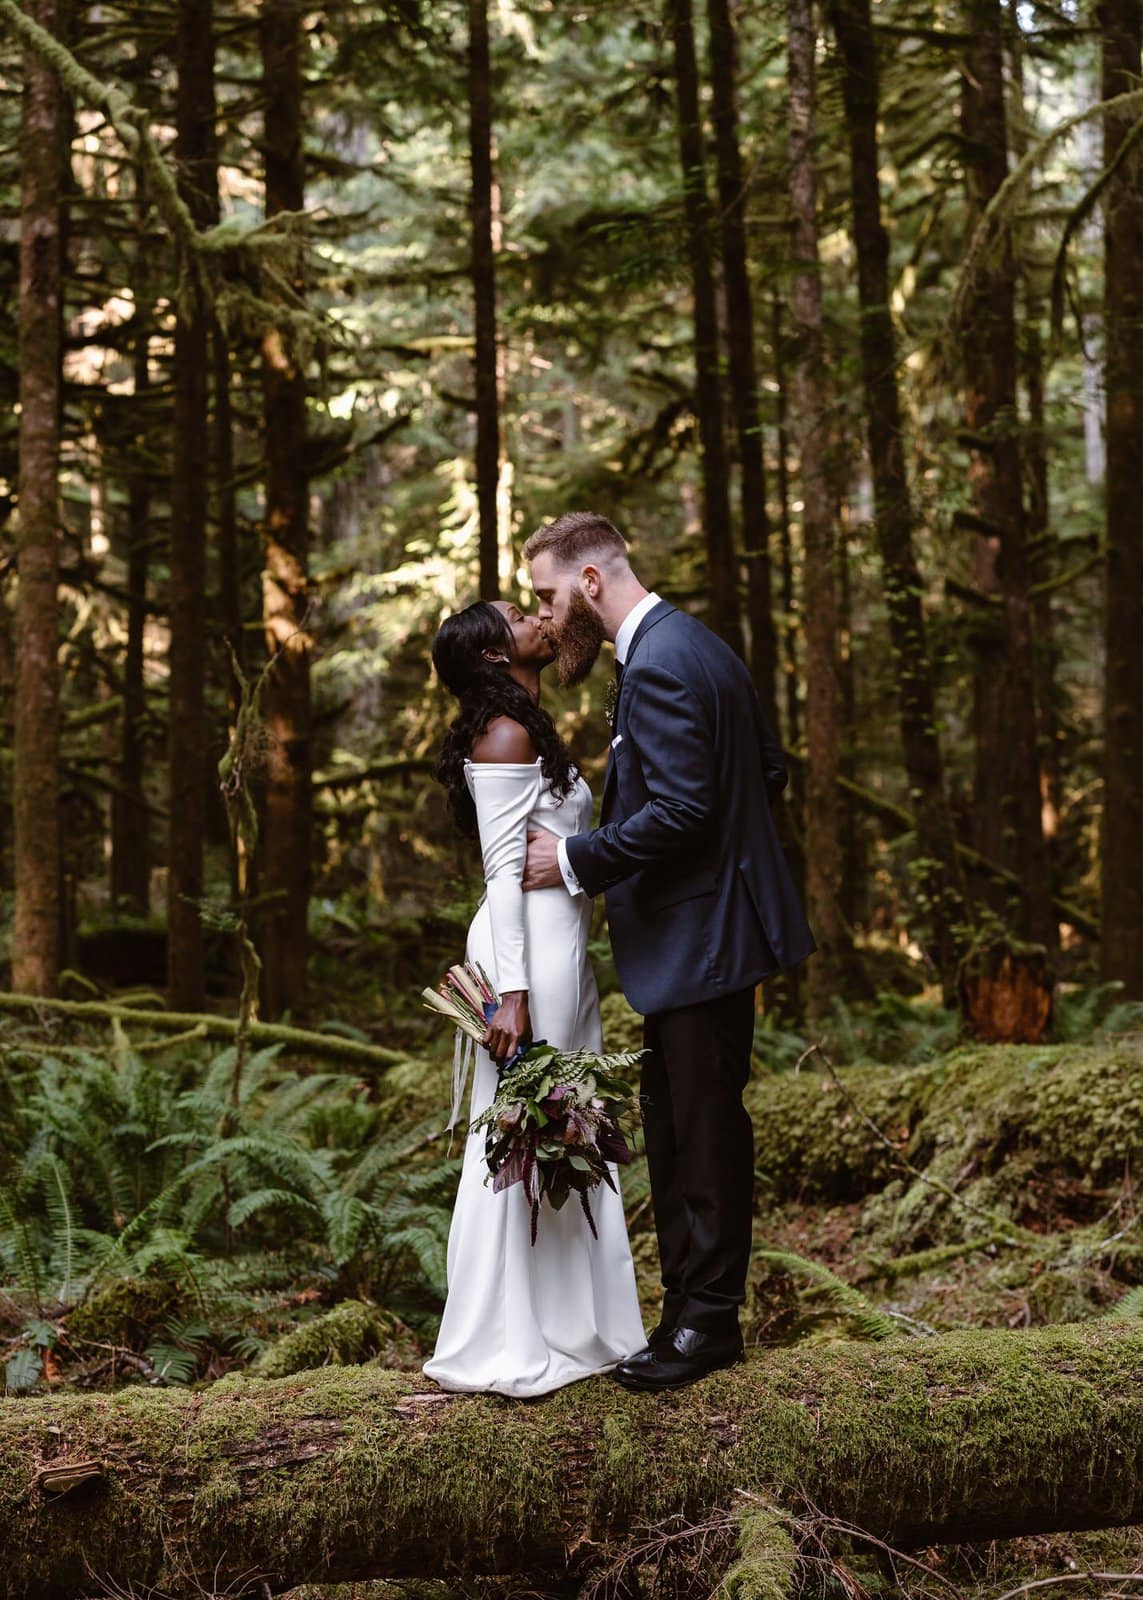 Intimate wedding at Olympic National Park.